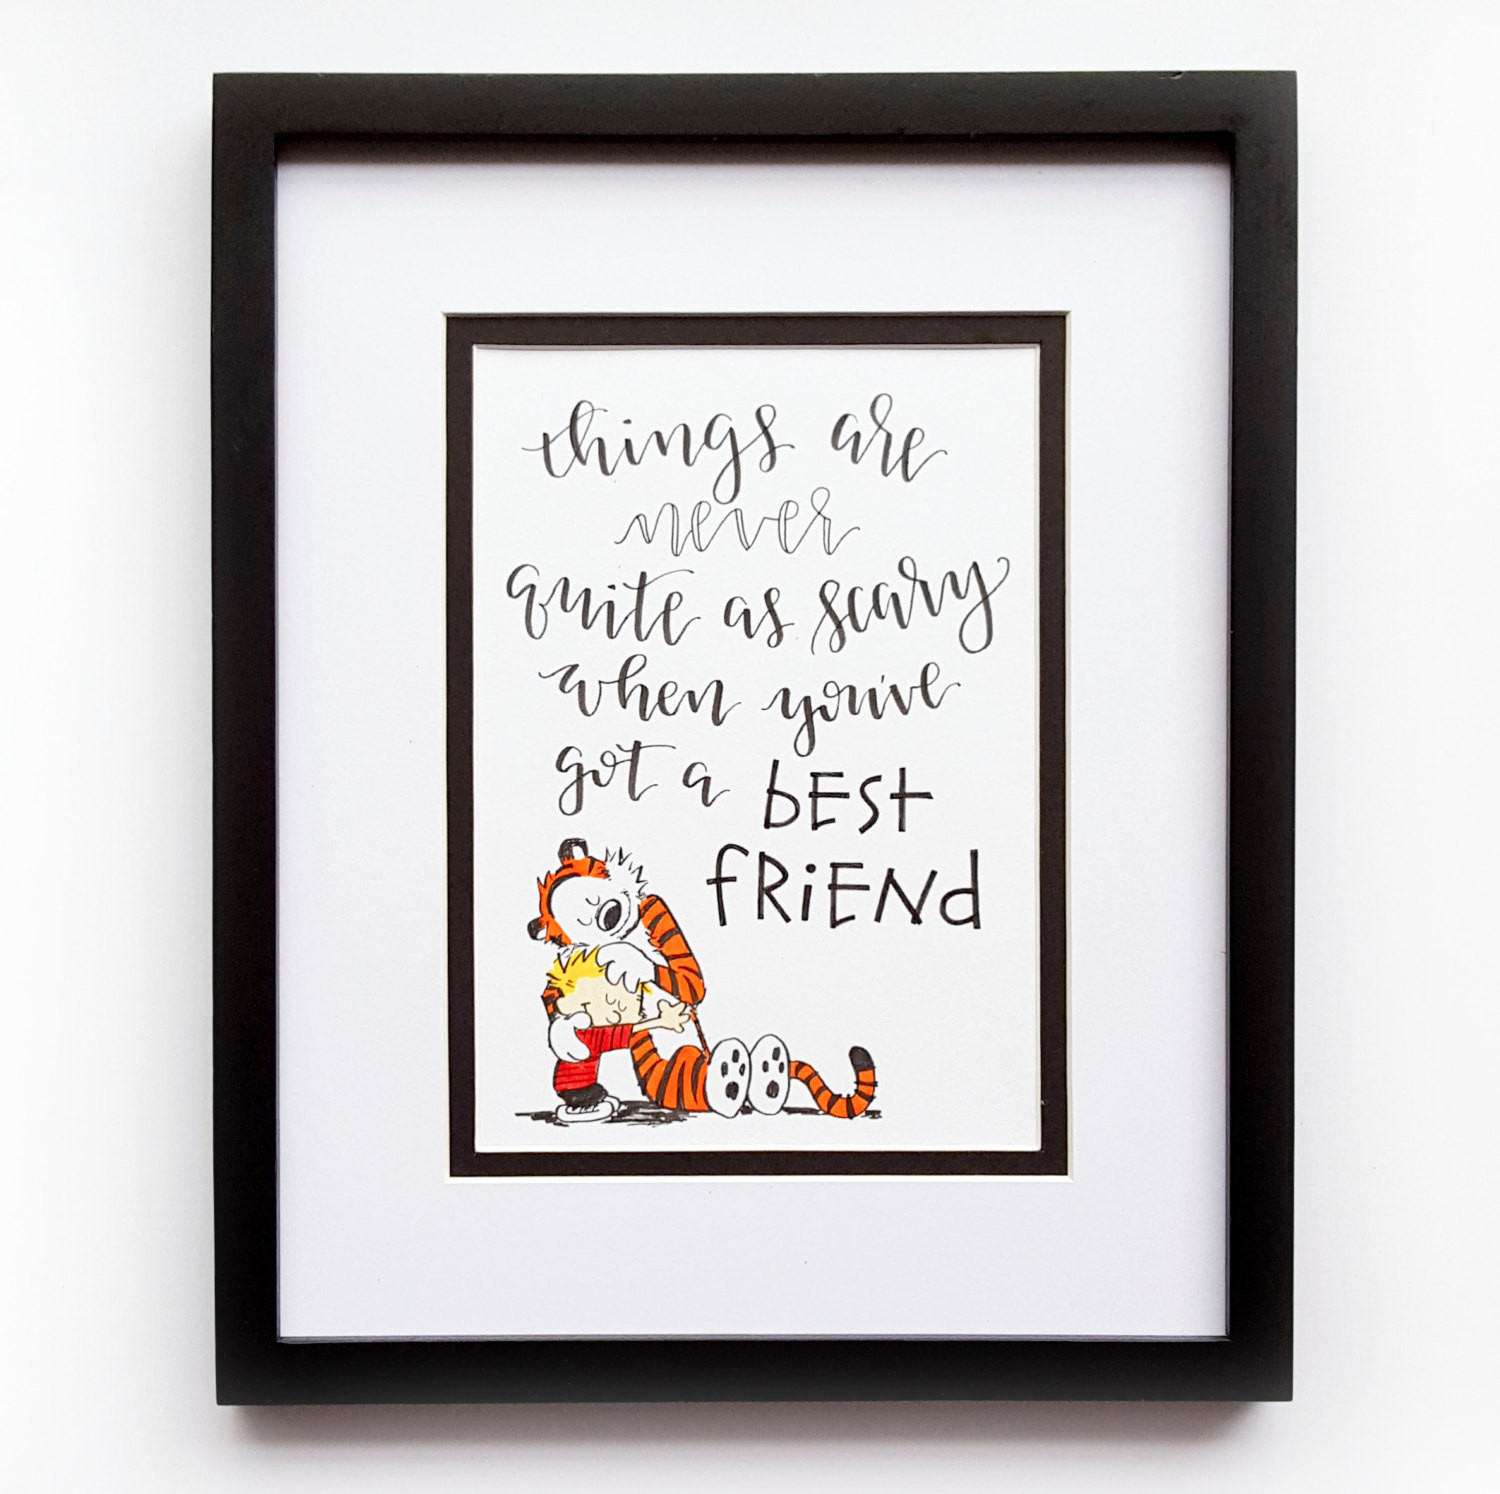 Calvin And Hobbes Friendship Quotes
 Calvin and Hobbes Best Friend Quote Handlettered